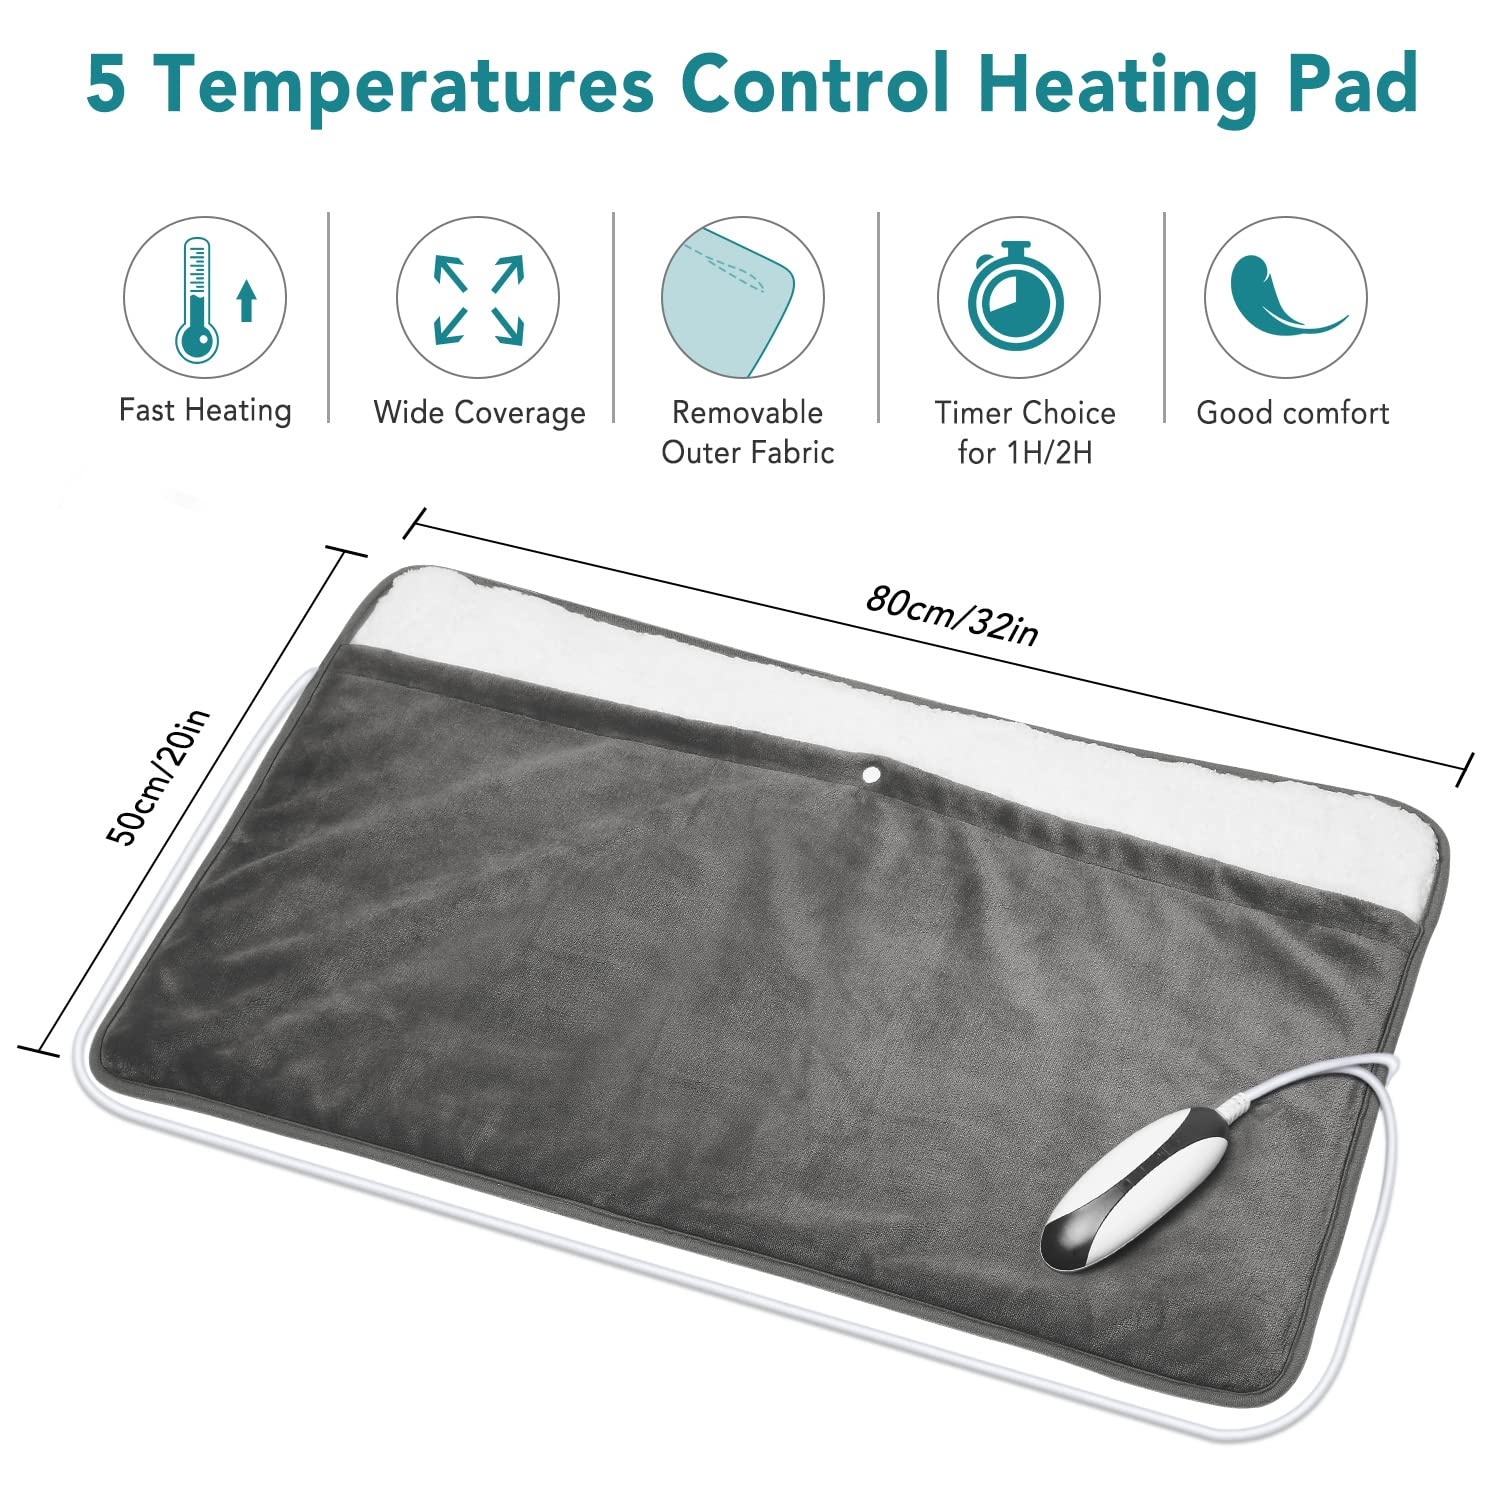 Load image into Gallery viewer, Maxkare Heating Pad Electric Foot Warmer - 20in x 32in Extra Large Size Full-Body Use for Feet, Back, Shoulders with Auto Shut Off, Grey
